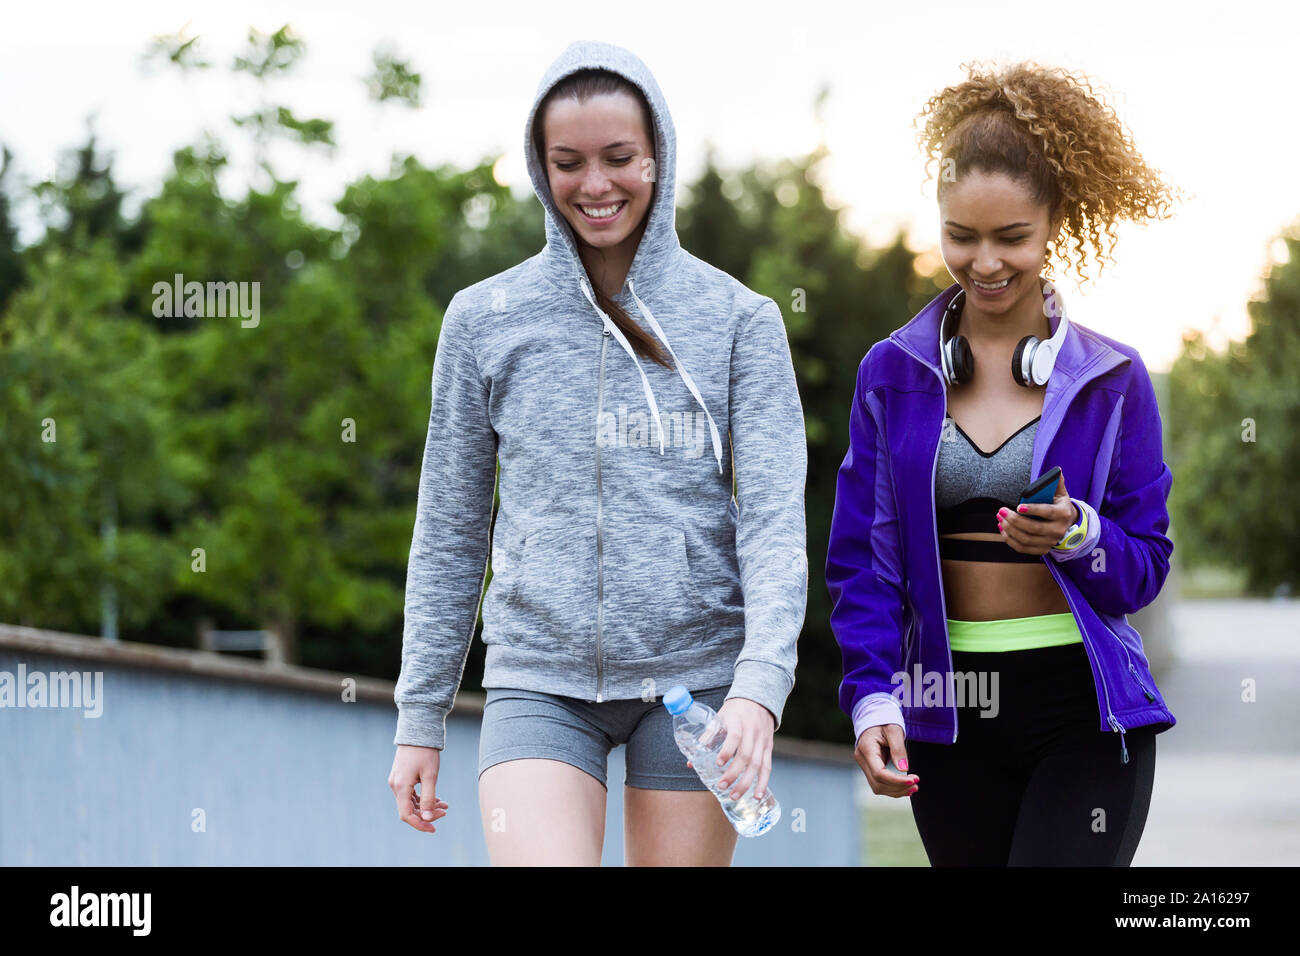 Two smiling sporty young women walking in park after workout Stock Photo